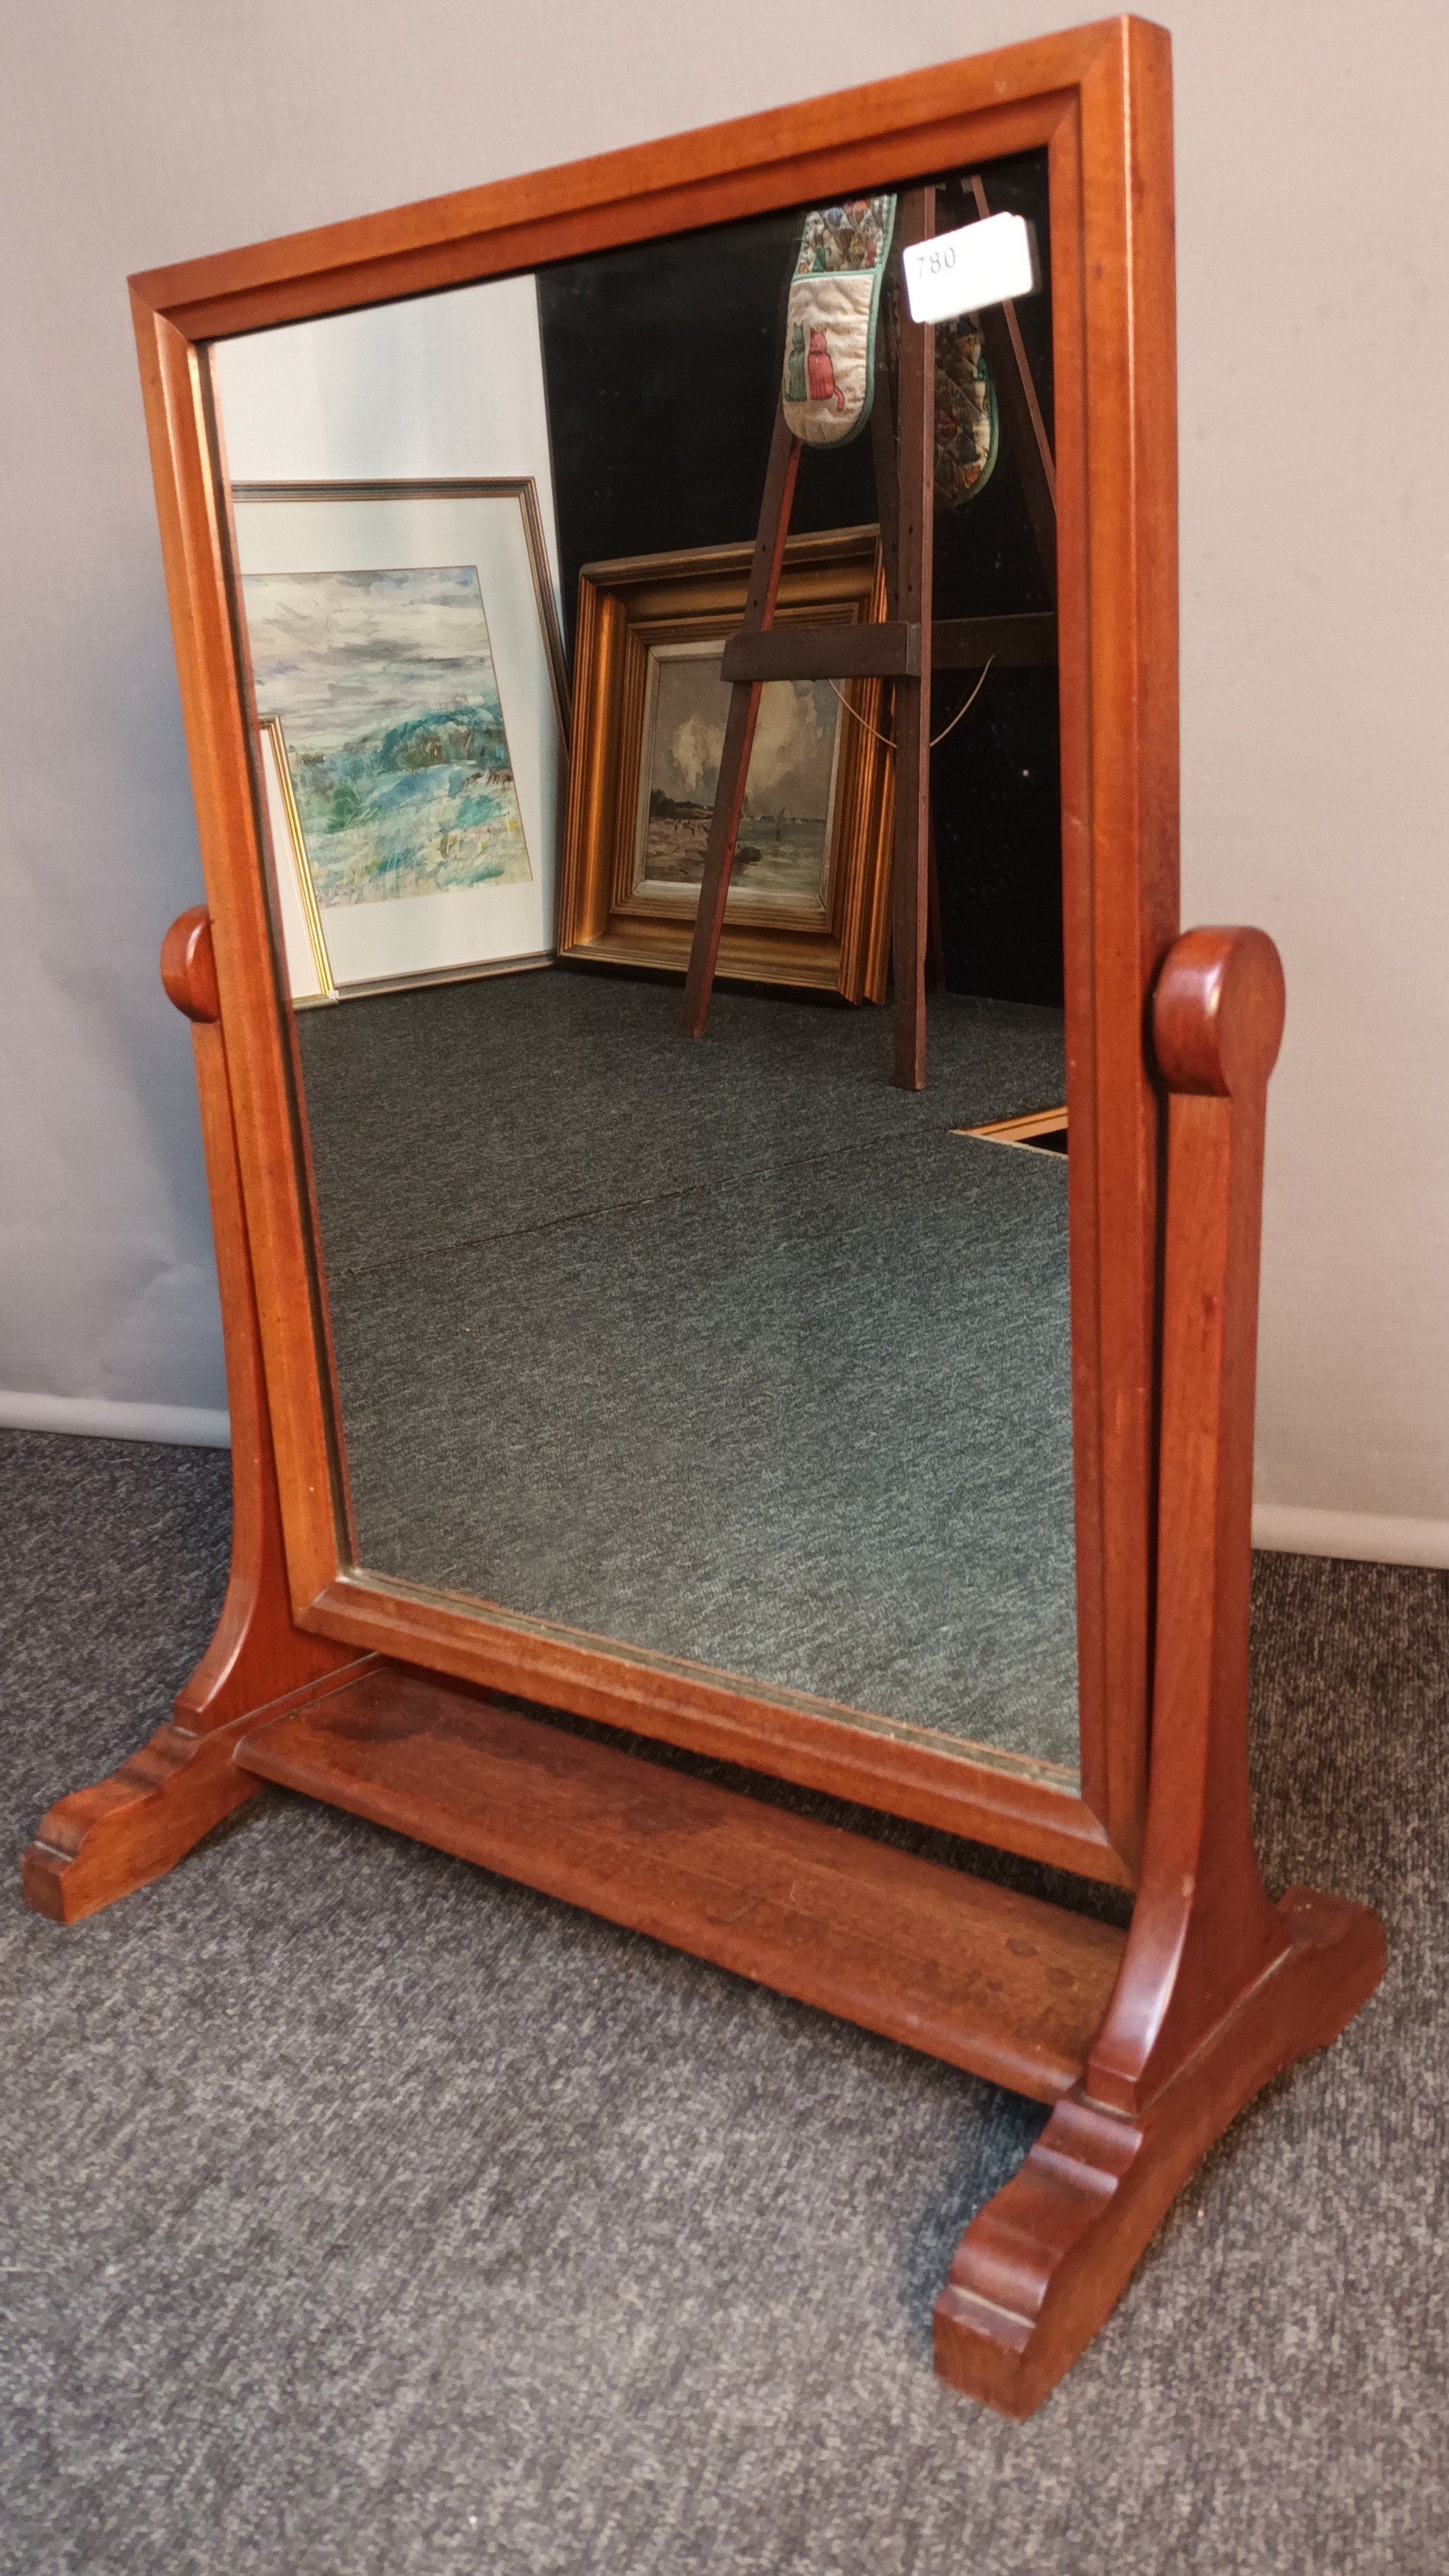 Antique style table top dressing mirror. [70x45cm] - Image 2 of 3